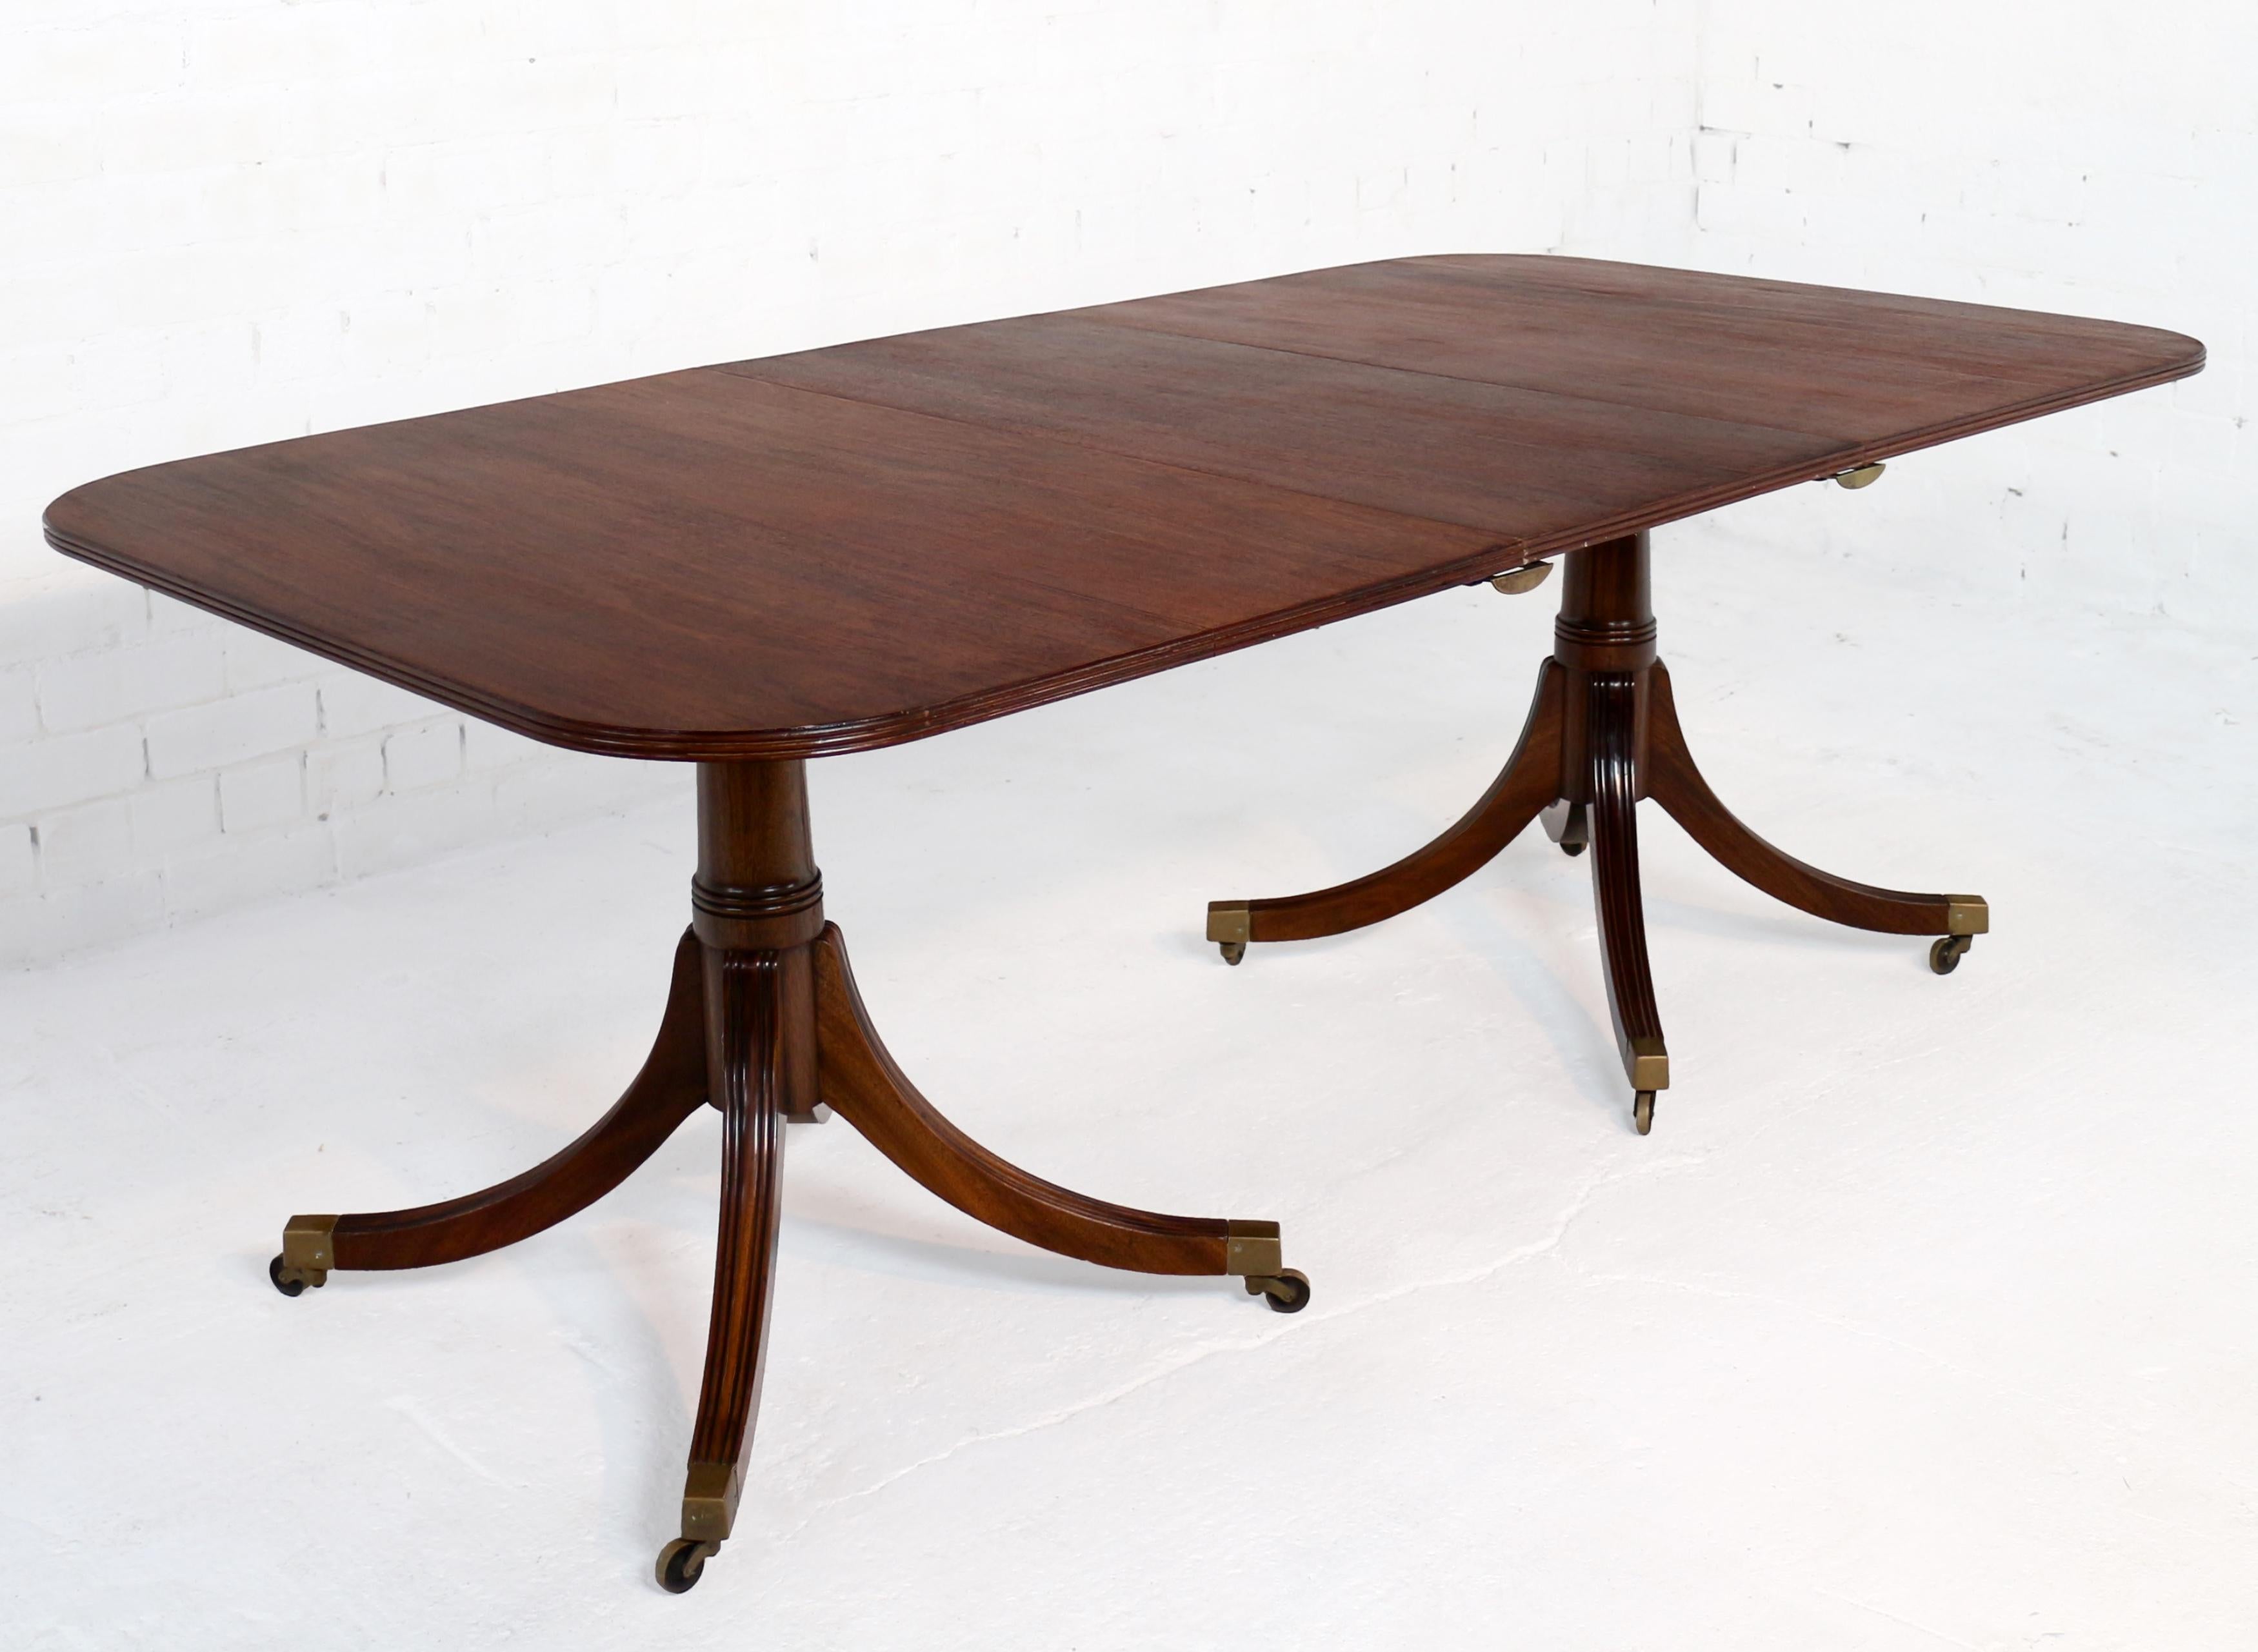 English Regency Style Solid Mahogany Twin Pillar Dining Table/Pair Side Tables, Seats 8